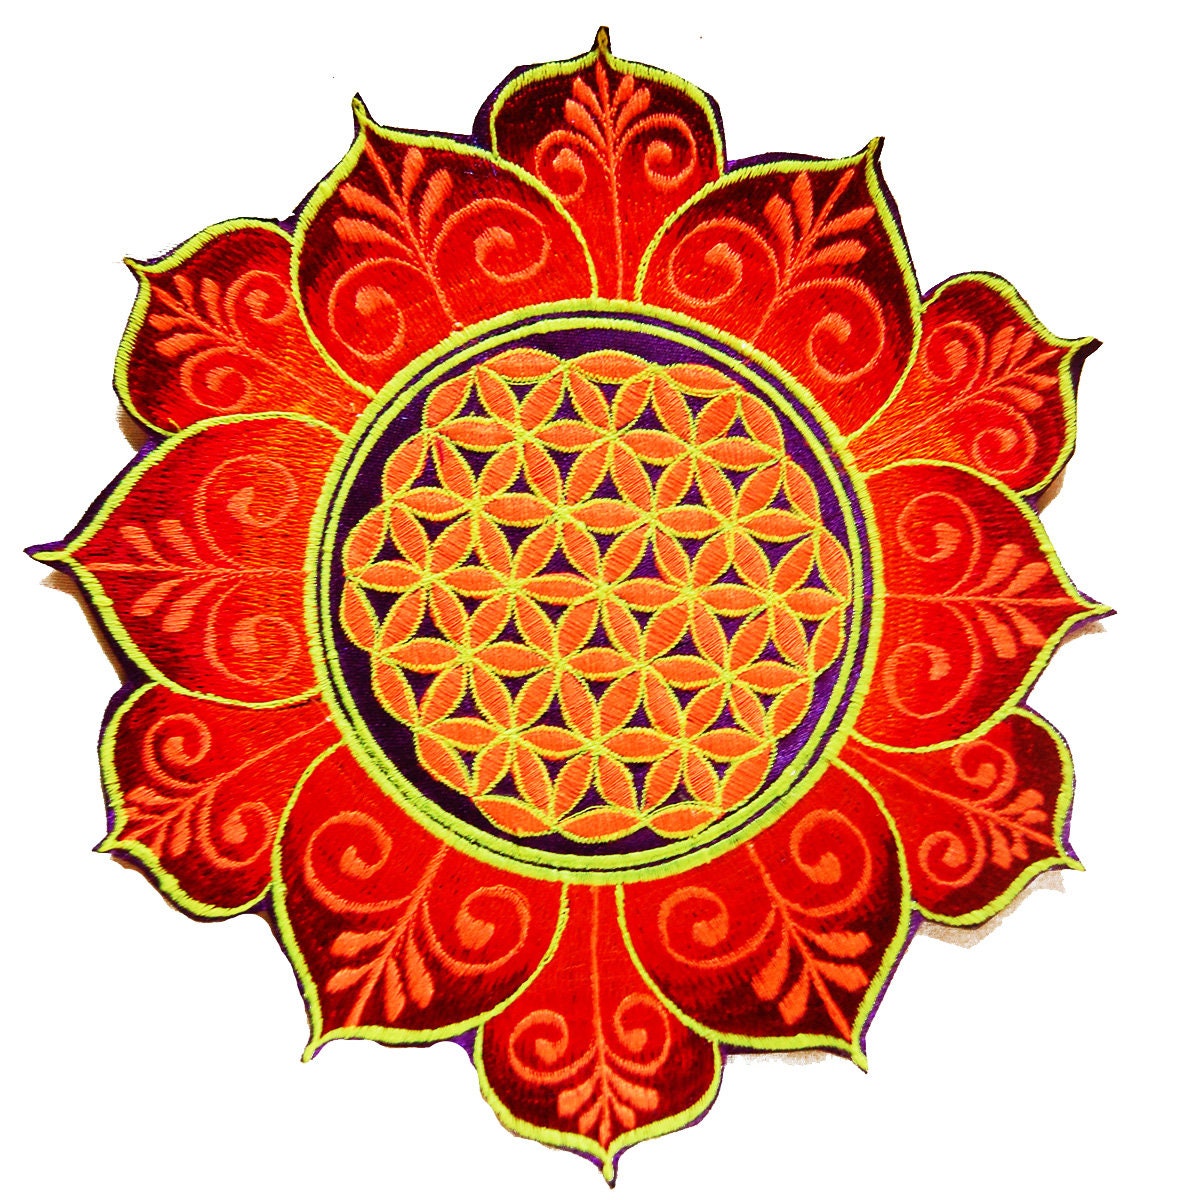 Blacklight Flower of Life patch holy geometry sacred geometry yantra